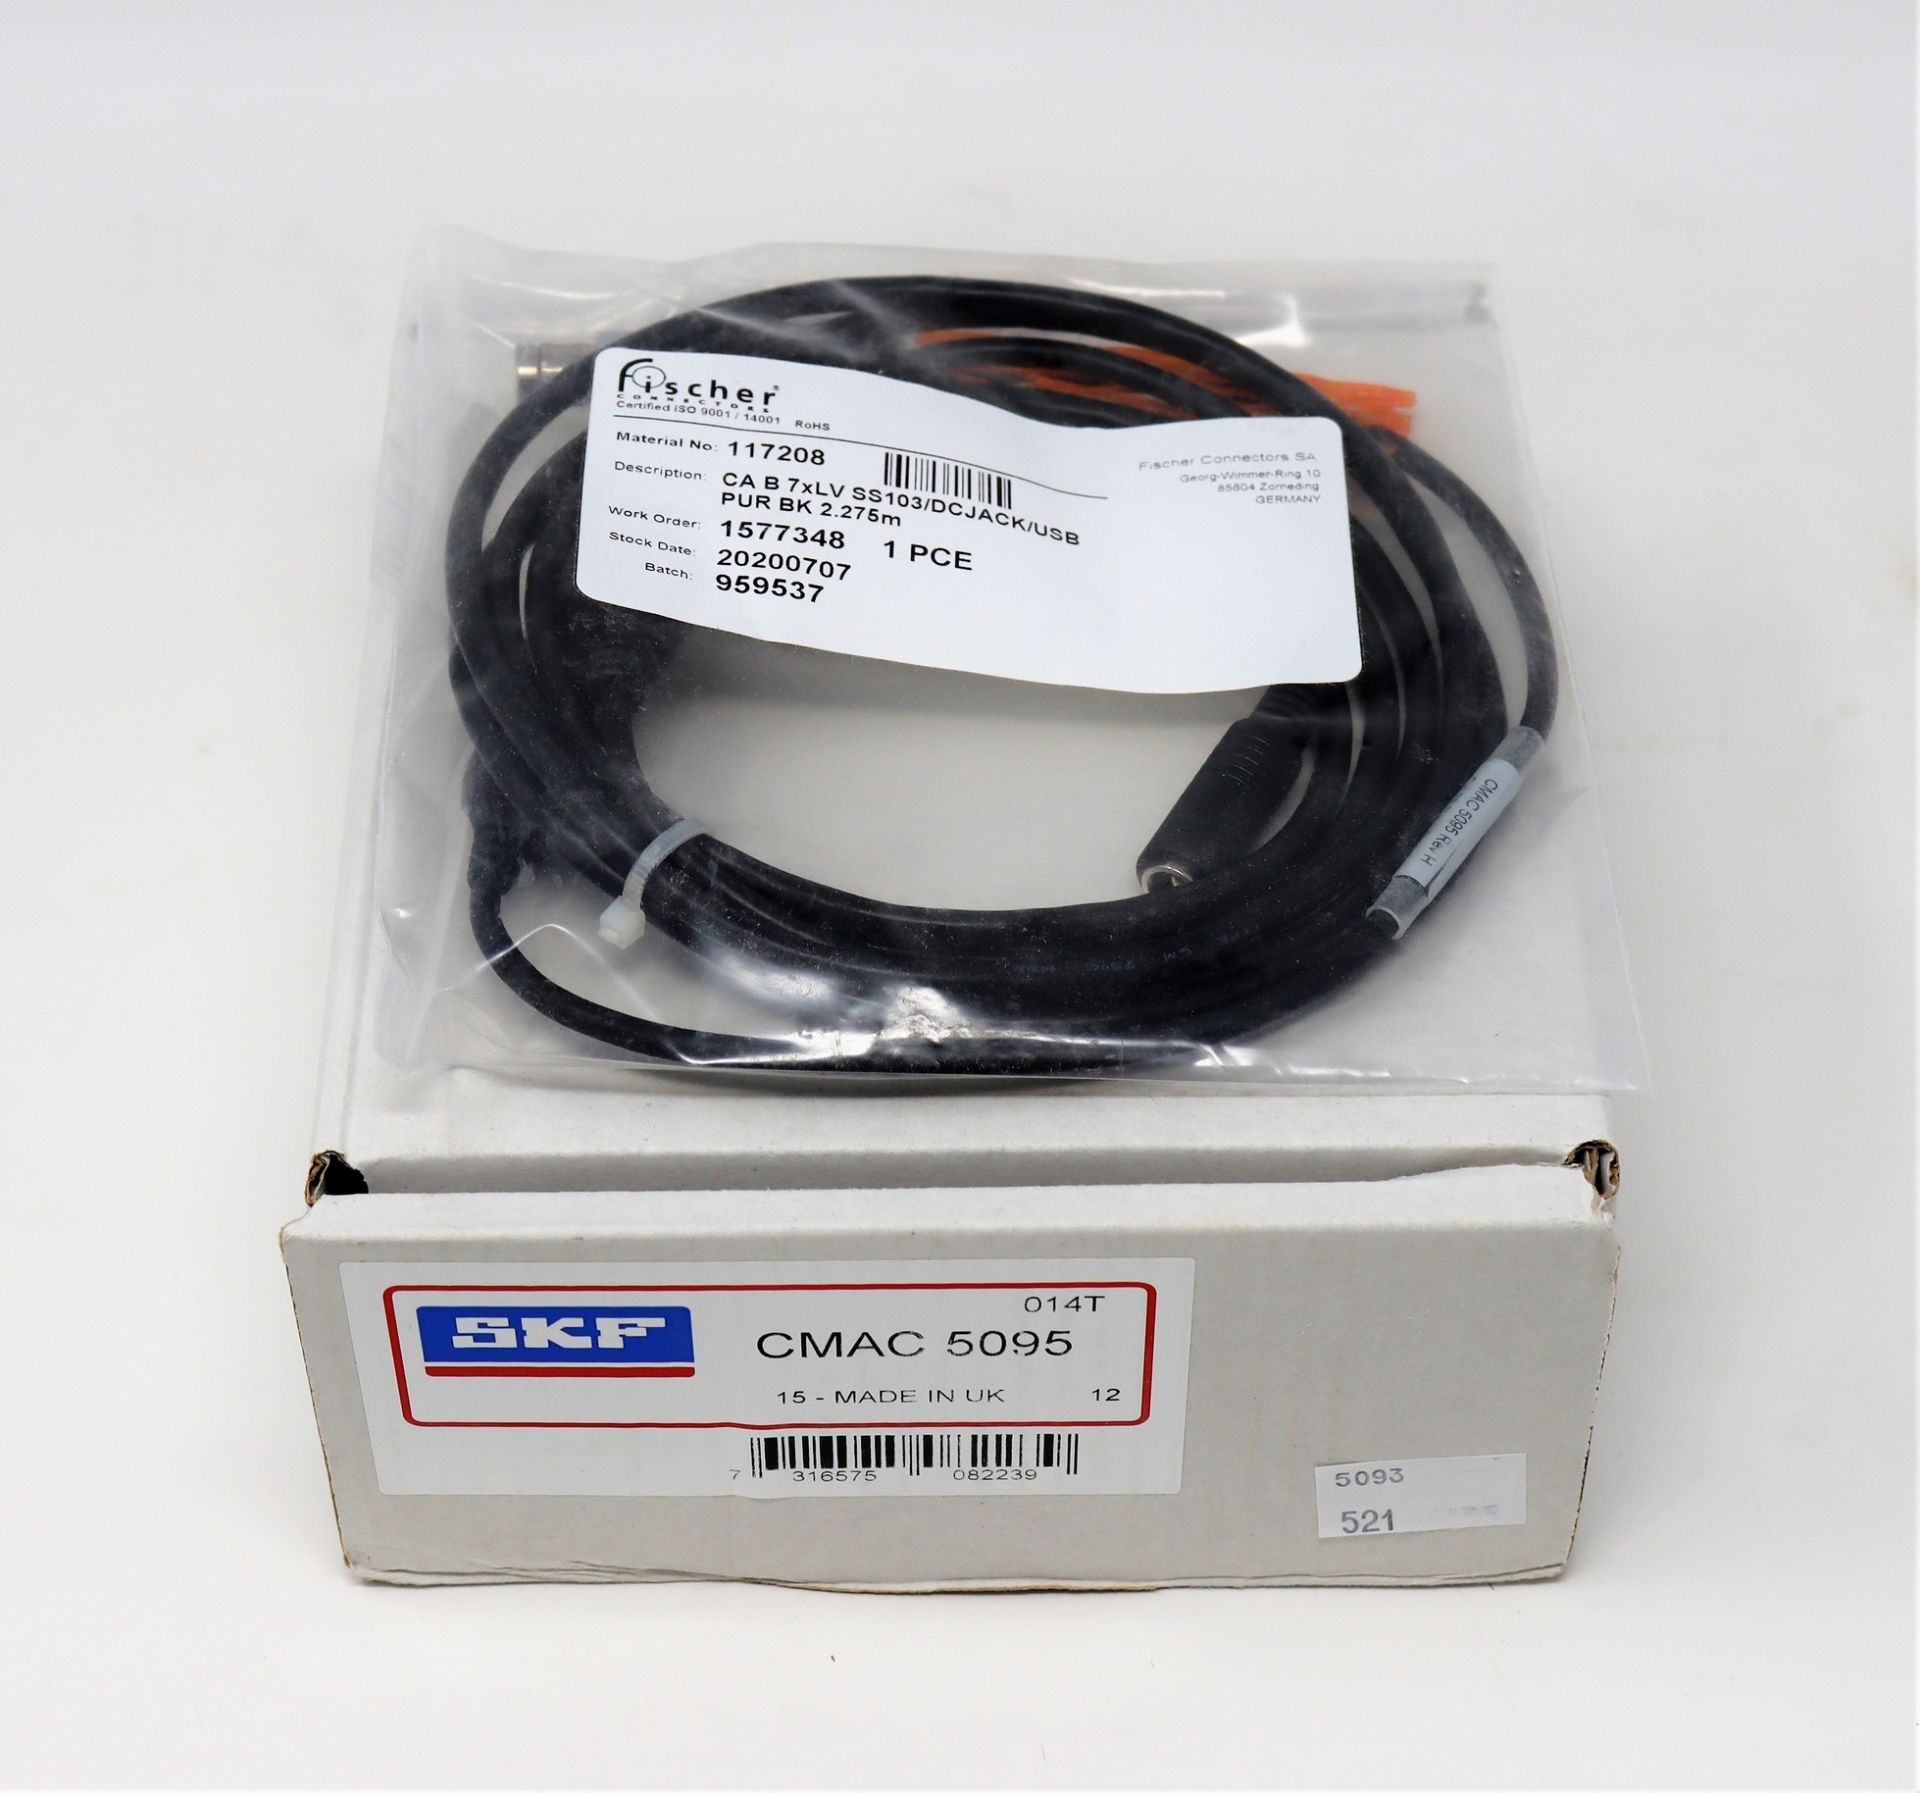 Five boxed as new SKF Microlog CMAC 5095 USB Communication/Power Splitter Cables (Individual